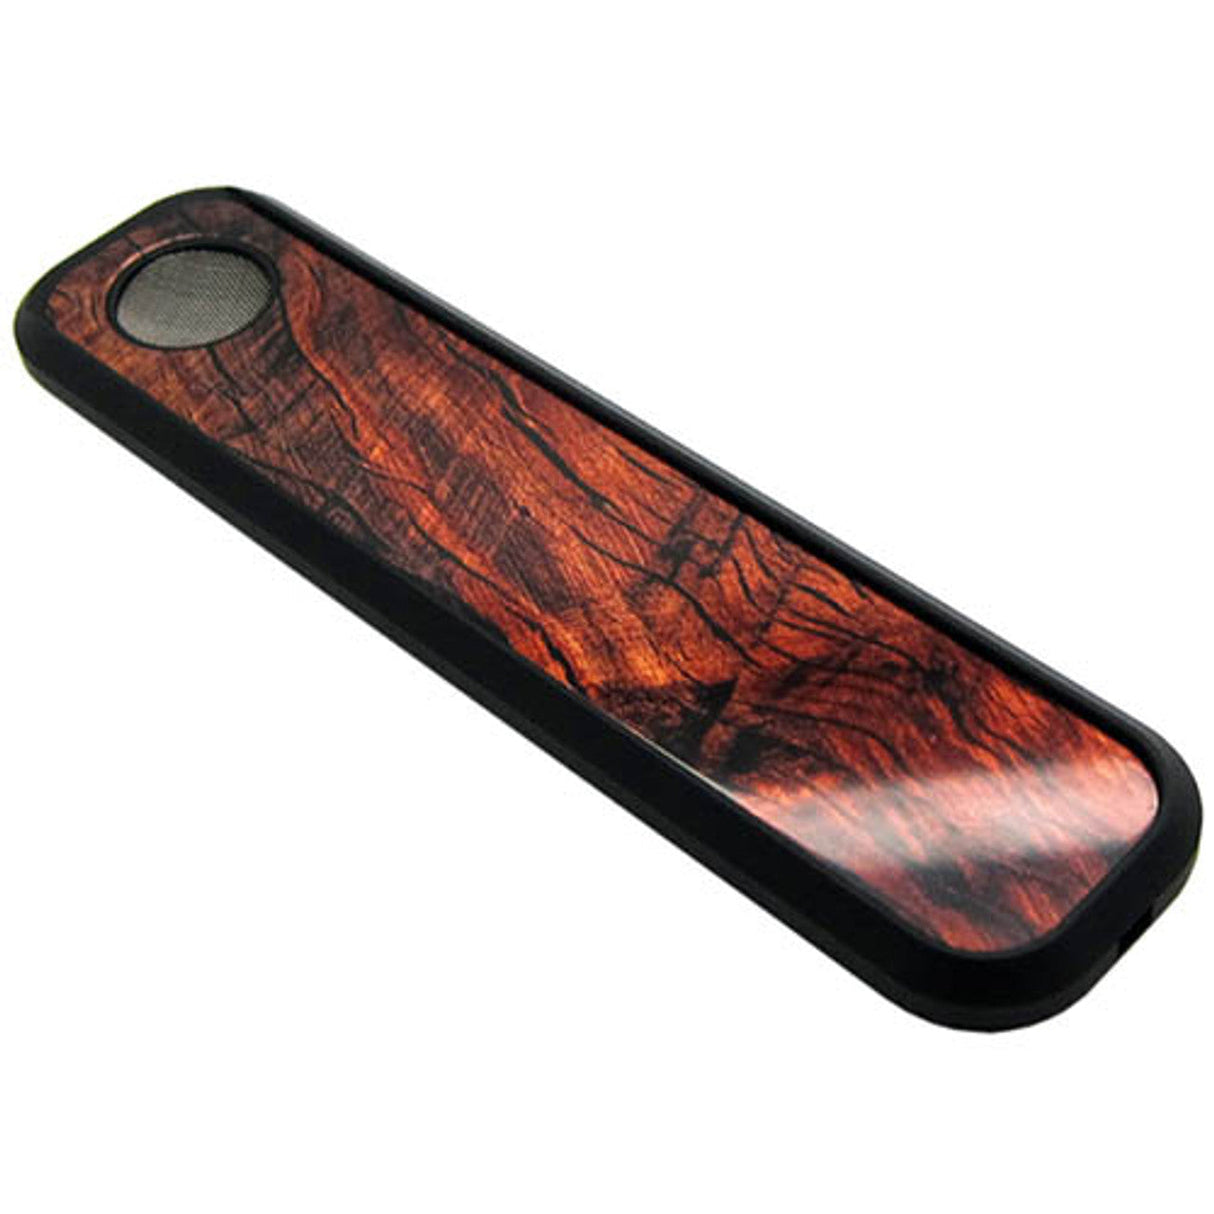 Genius Pipe - Portable Steel Hand Pipe with Wood Design - Top View